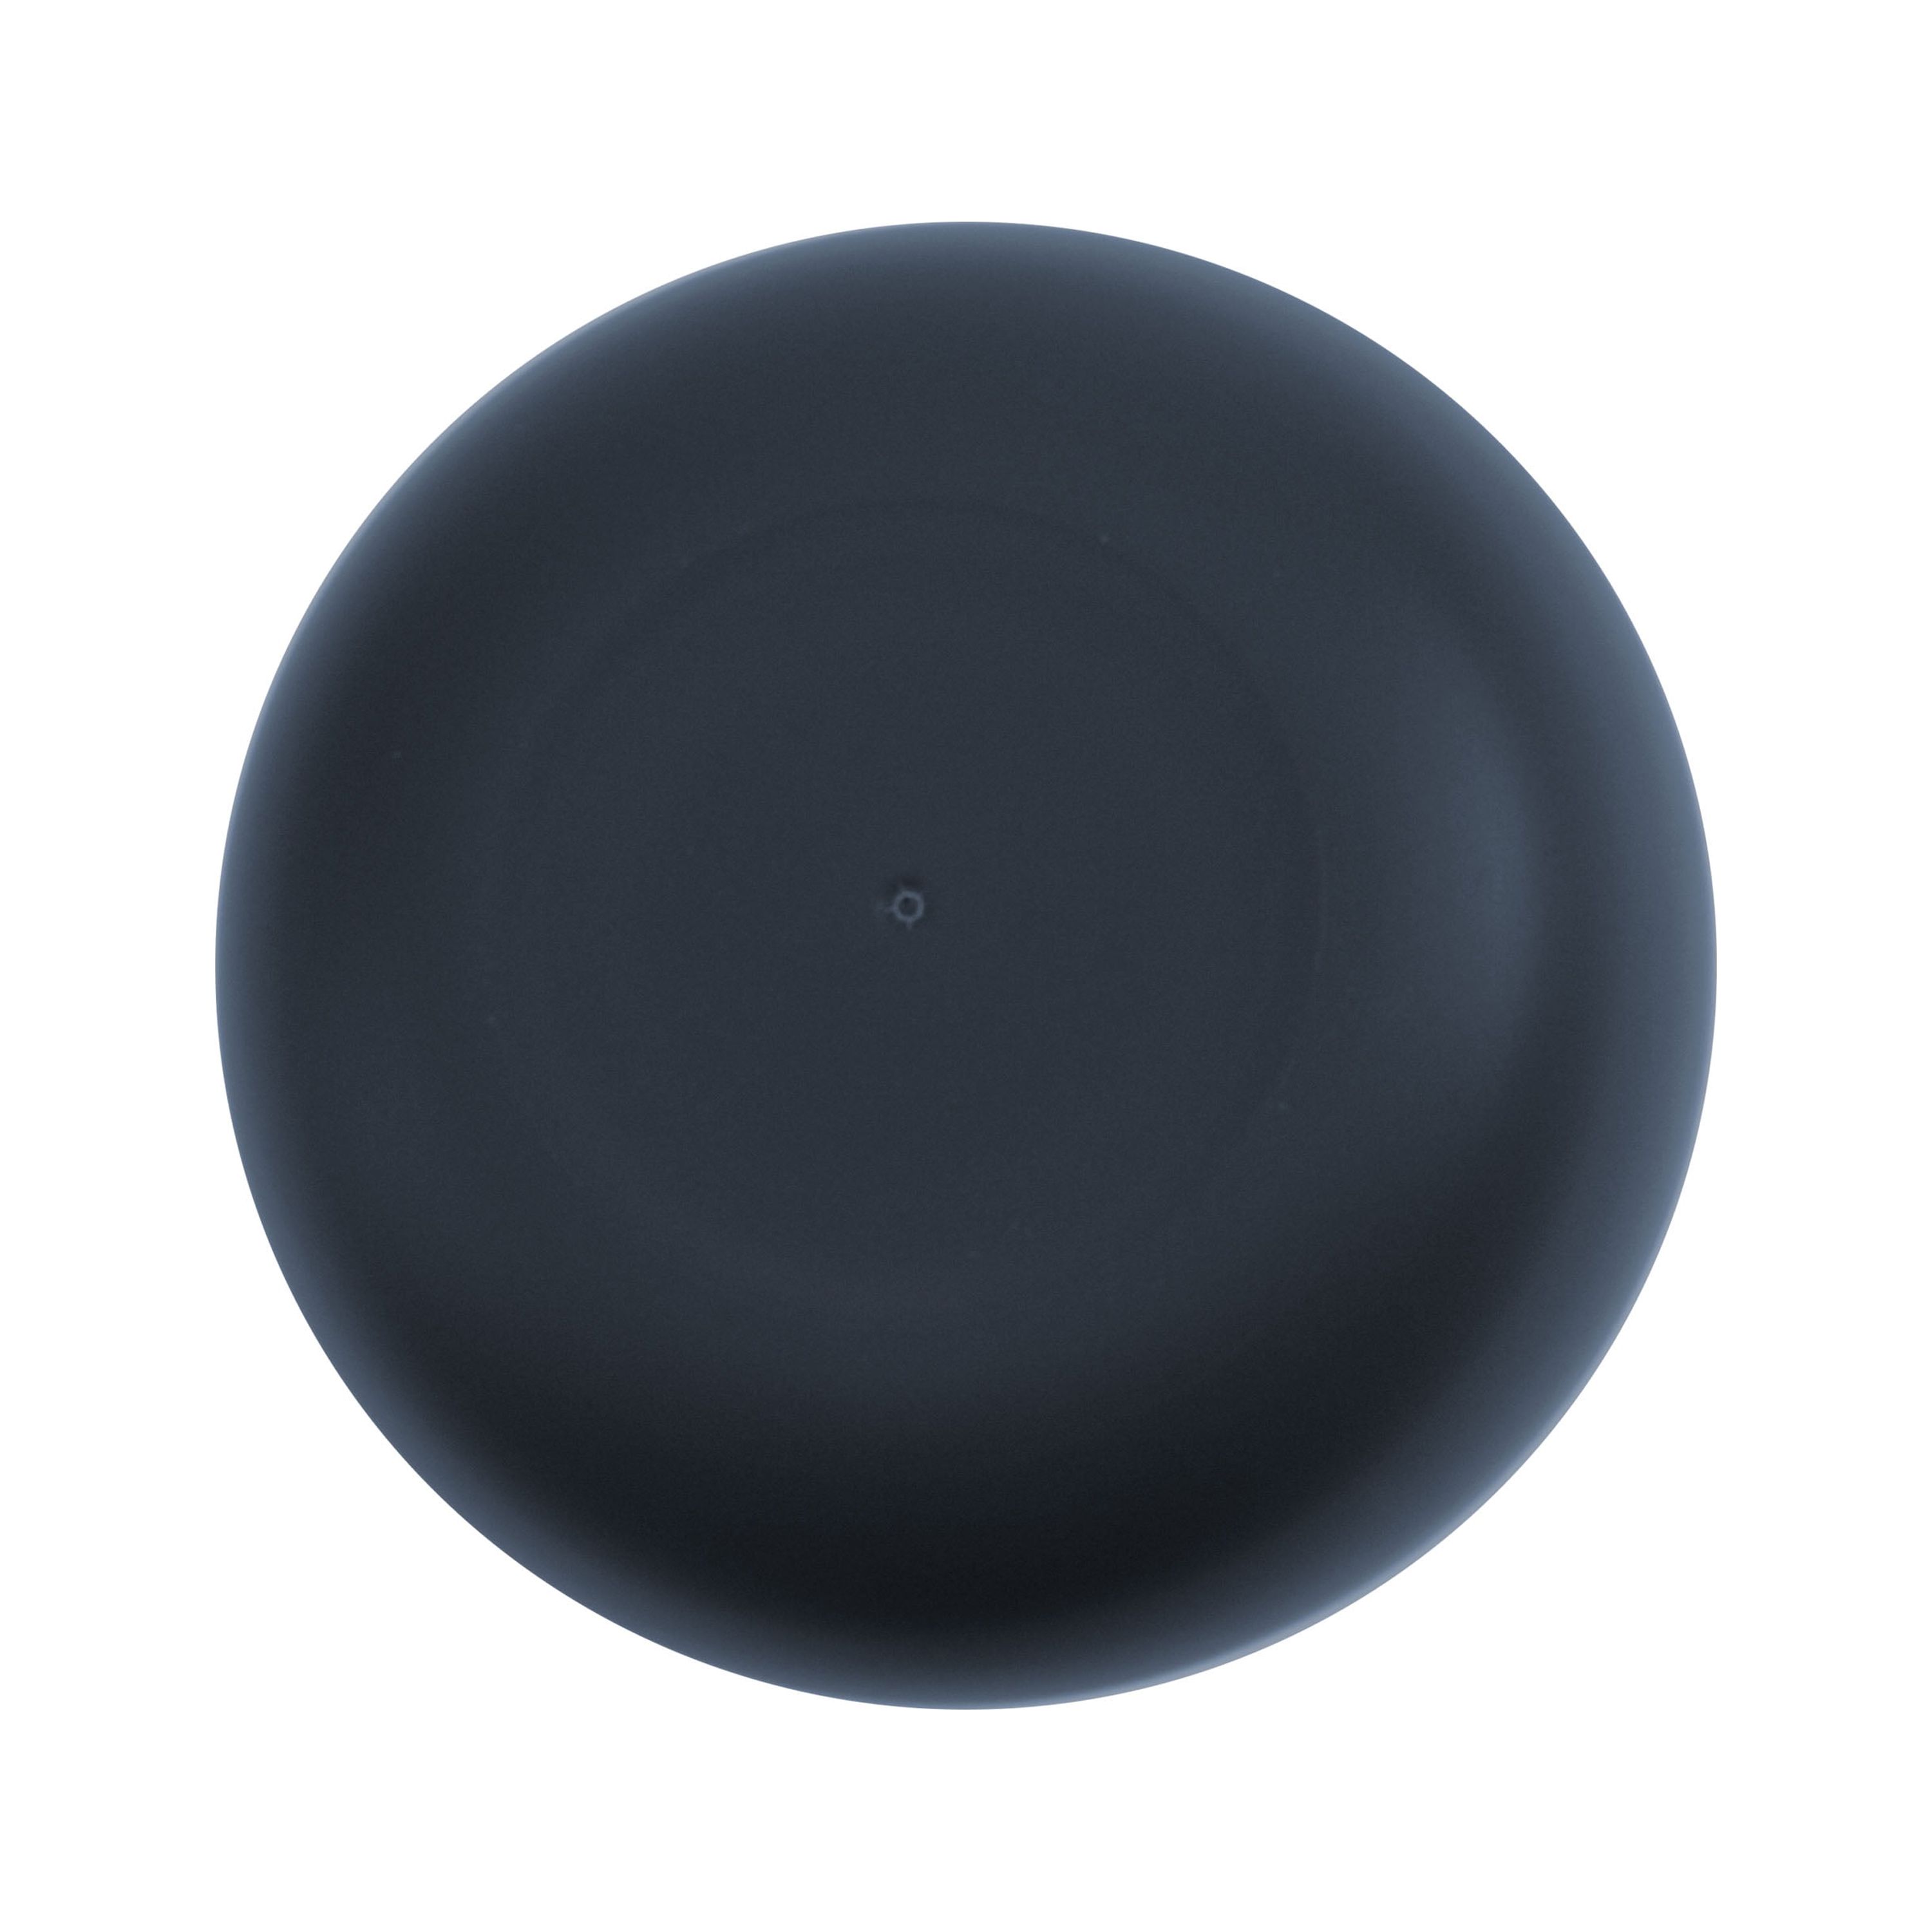 Mainstays - Dark Blue Round Plastic Cereal Bowl, 38-Ounce - image 3 of 4